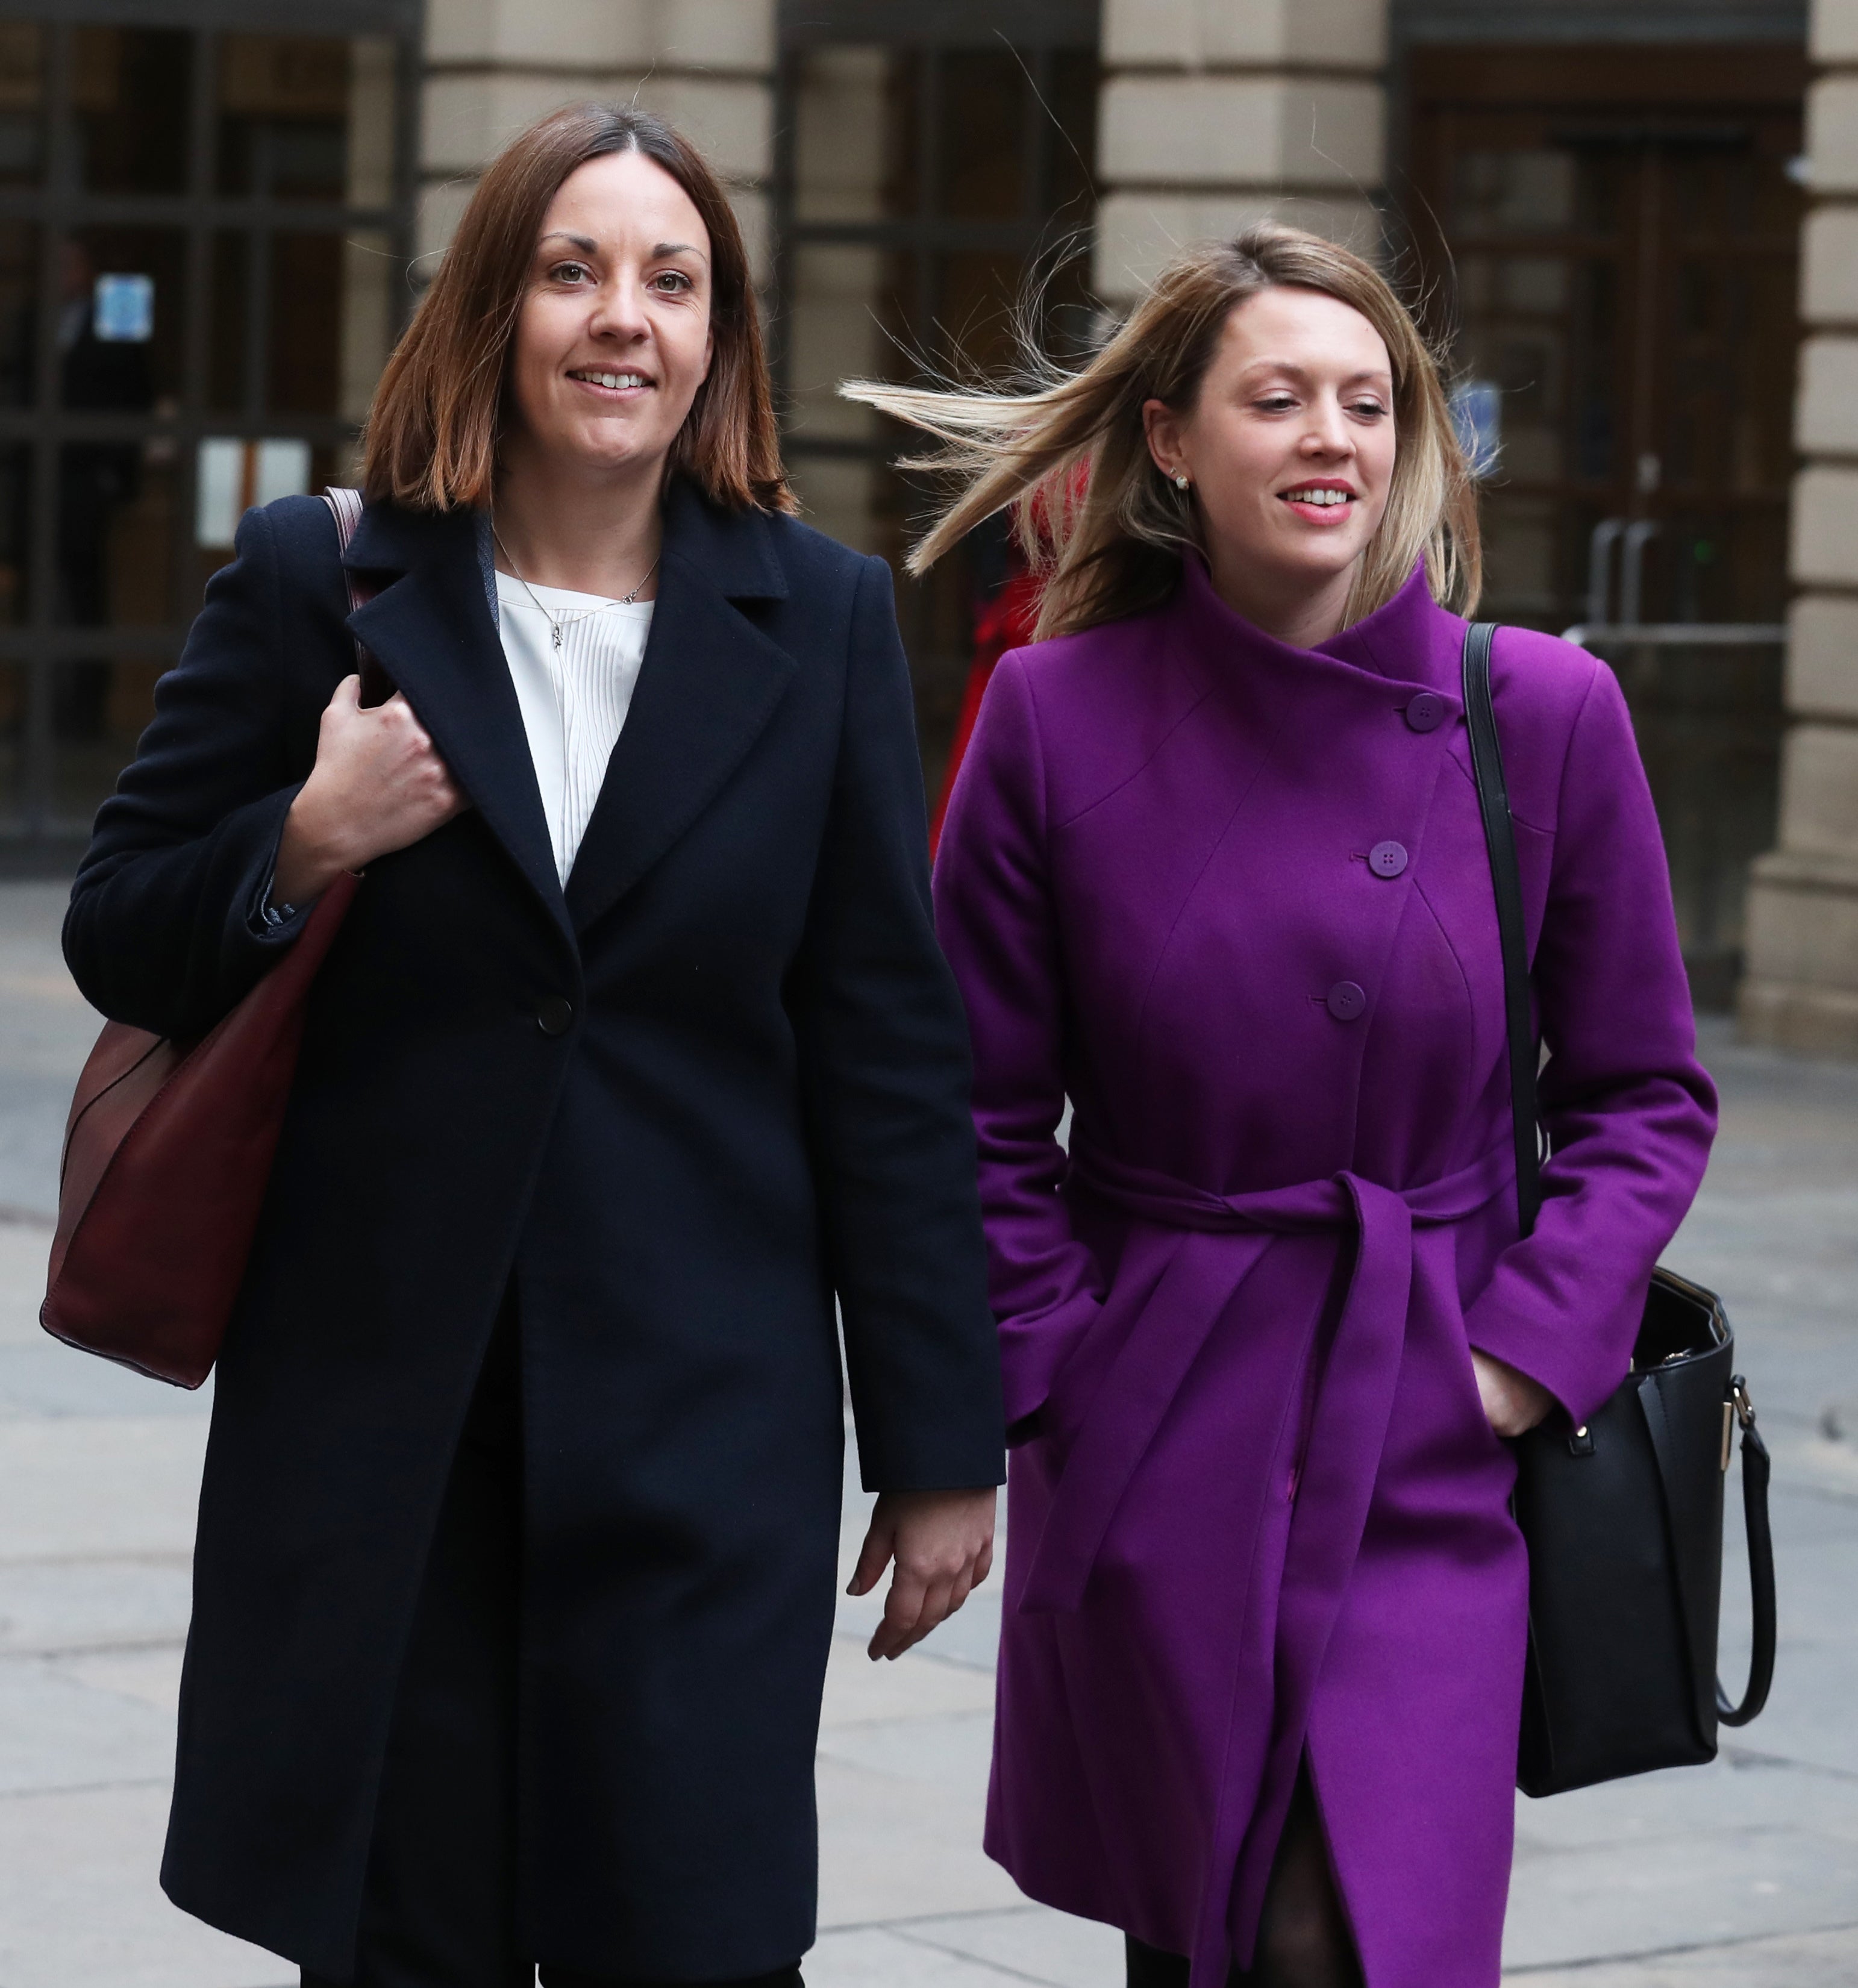 Former Scottish Labour leader Kezia Dugdale (left) and MSP Jenny Gilruth have married (Andrew Milligan/PA)